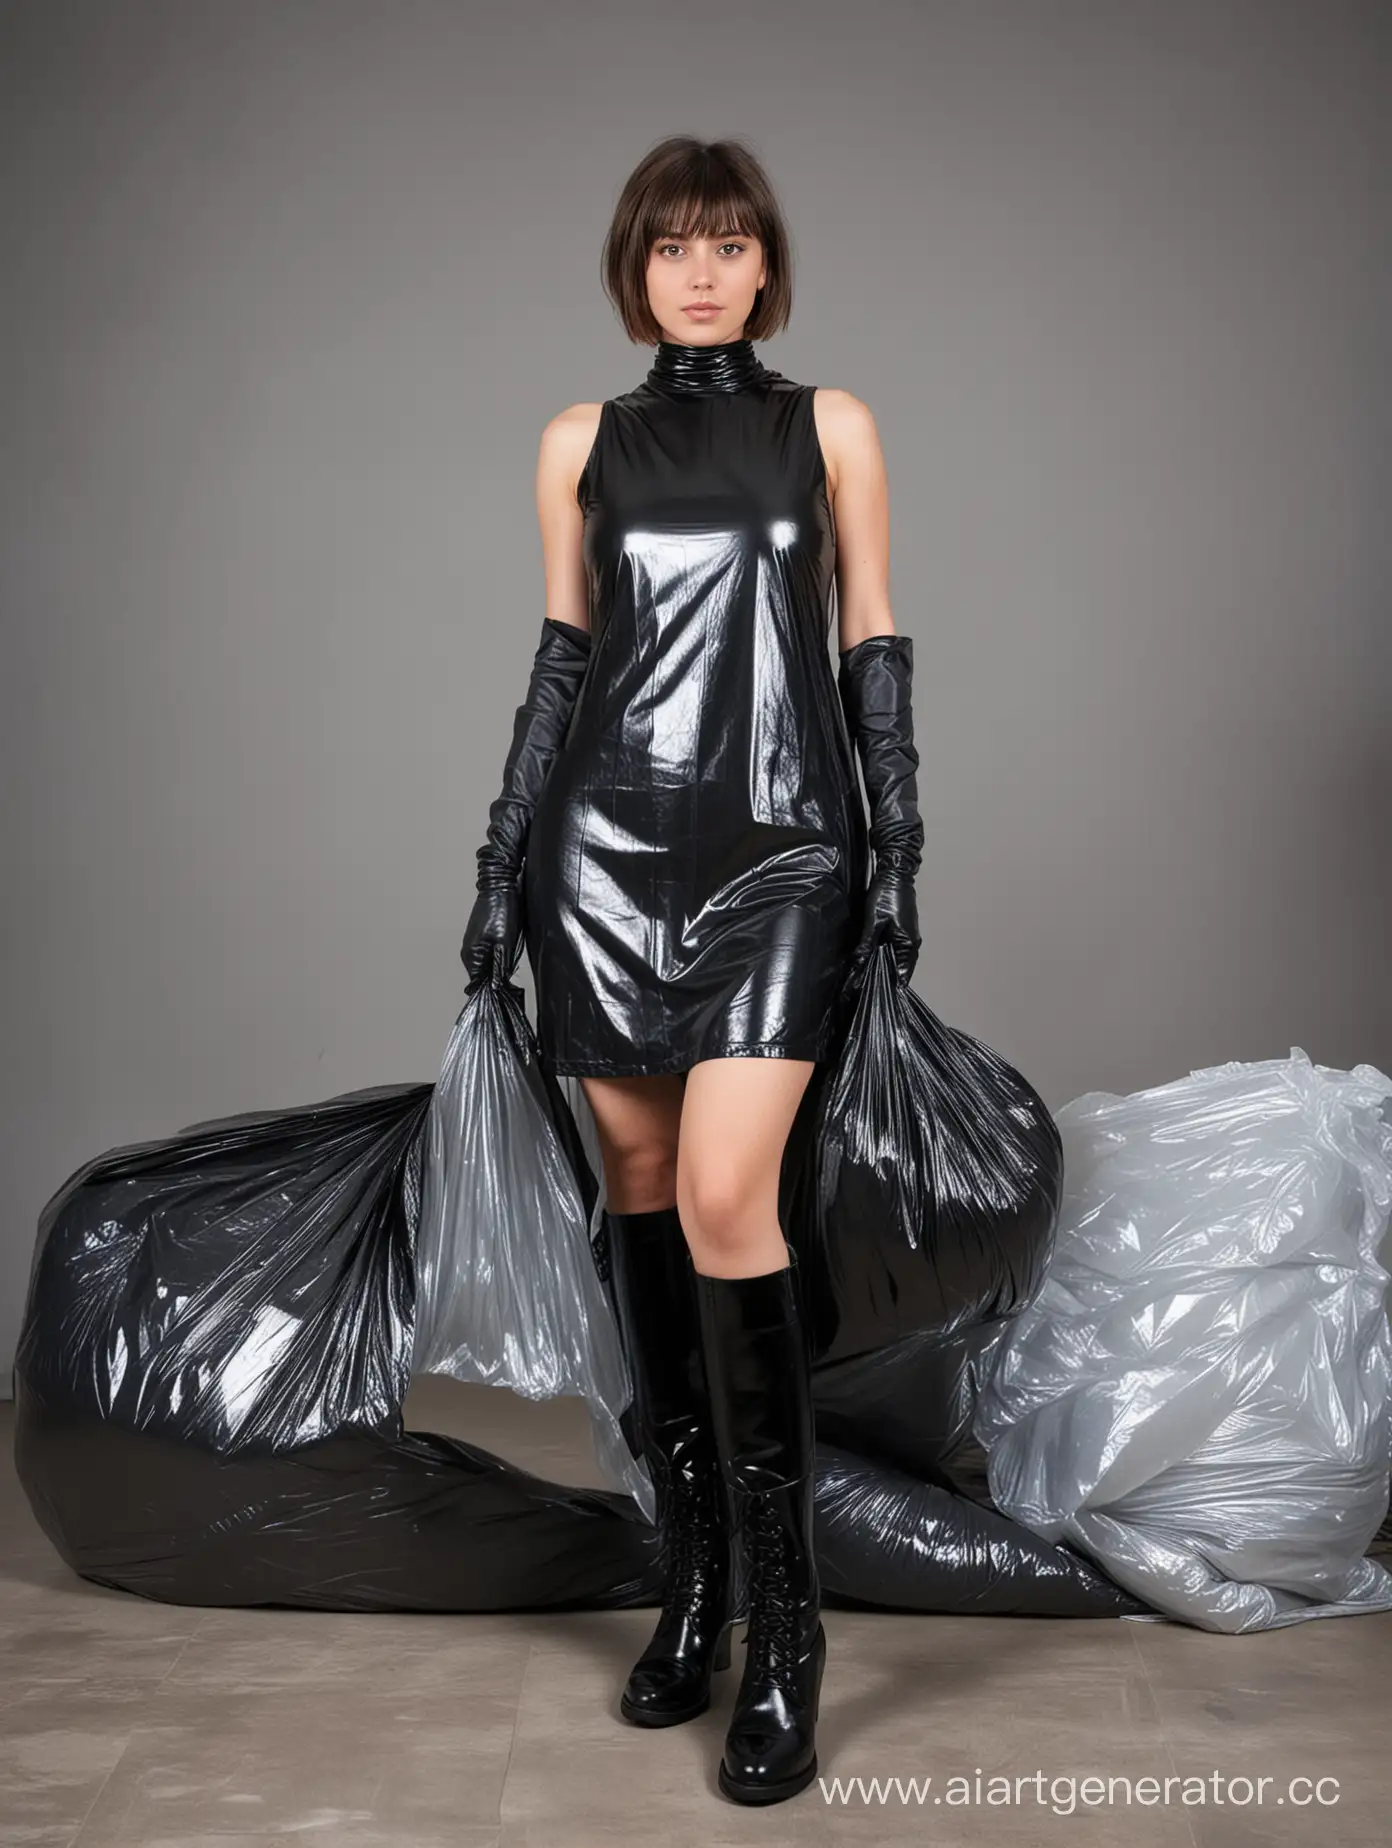 Young-Woman-with-Trash-Bag-Dress-in-a-Plastic-Environment